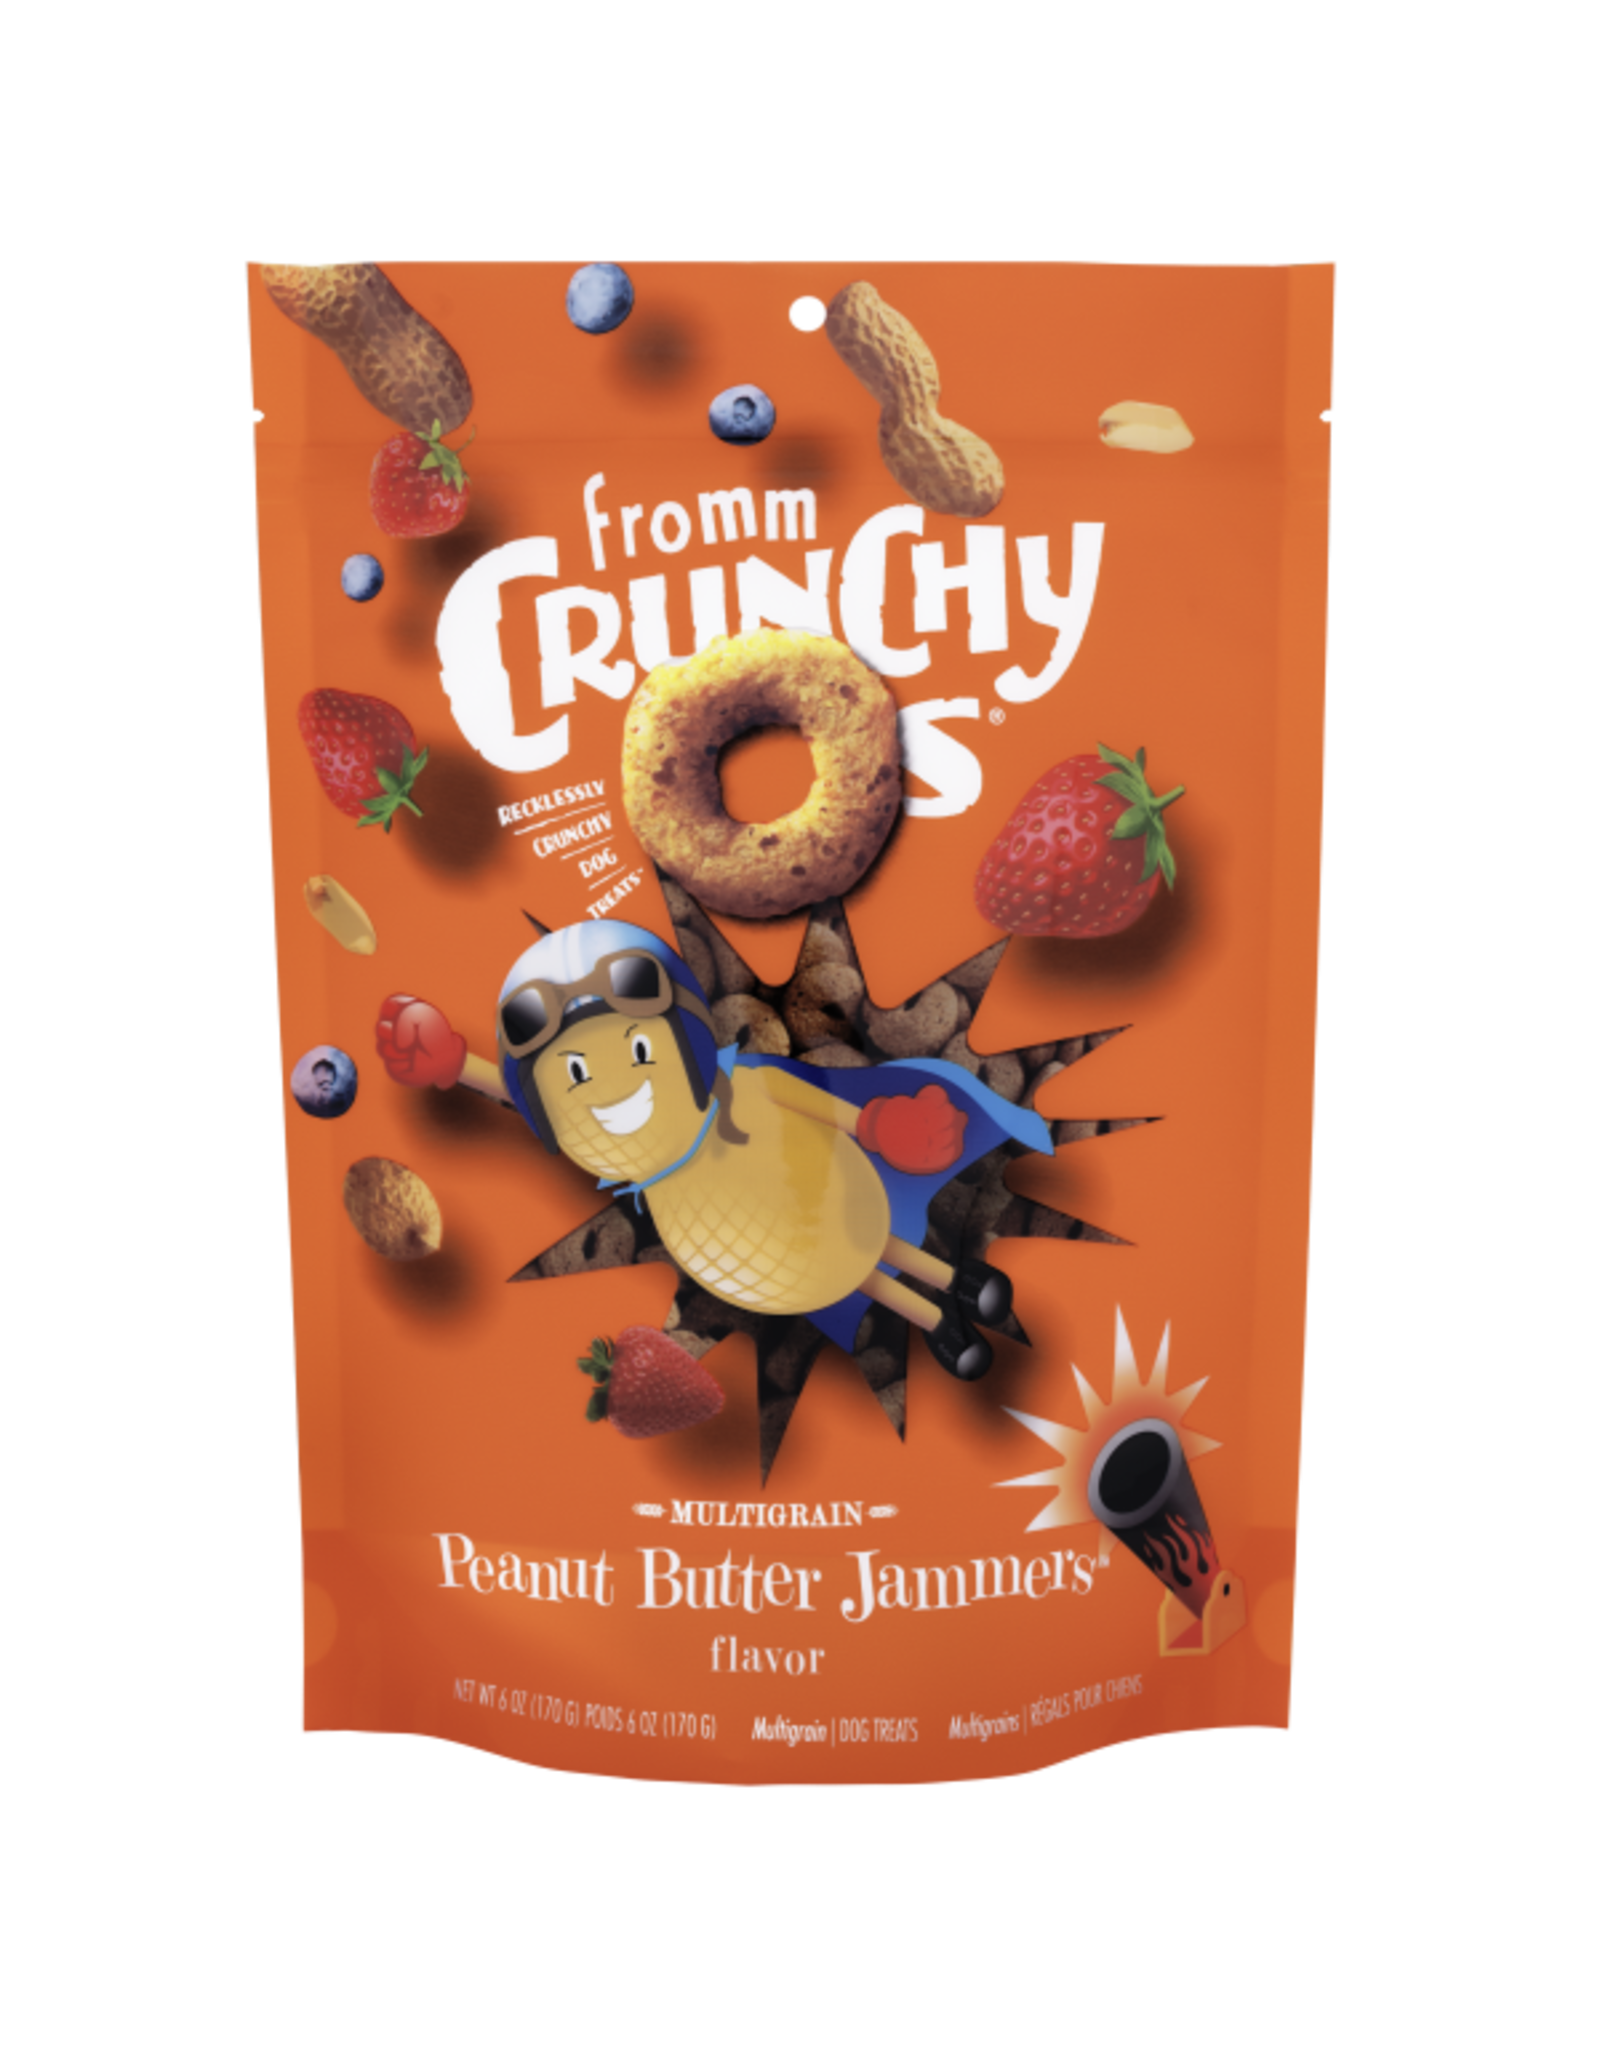 Fromm Crunchy Os Peanut Butter Jammers Treats 6 oz